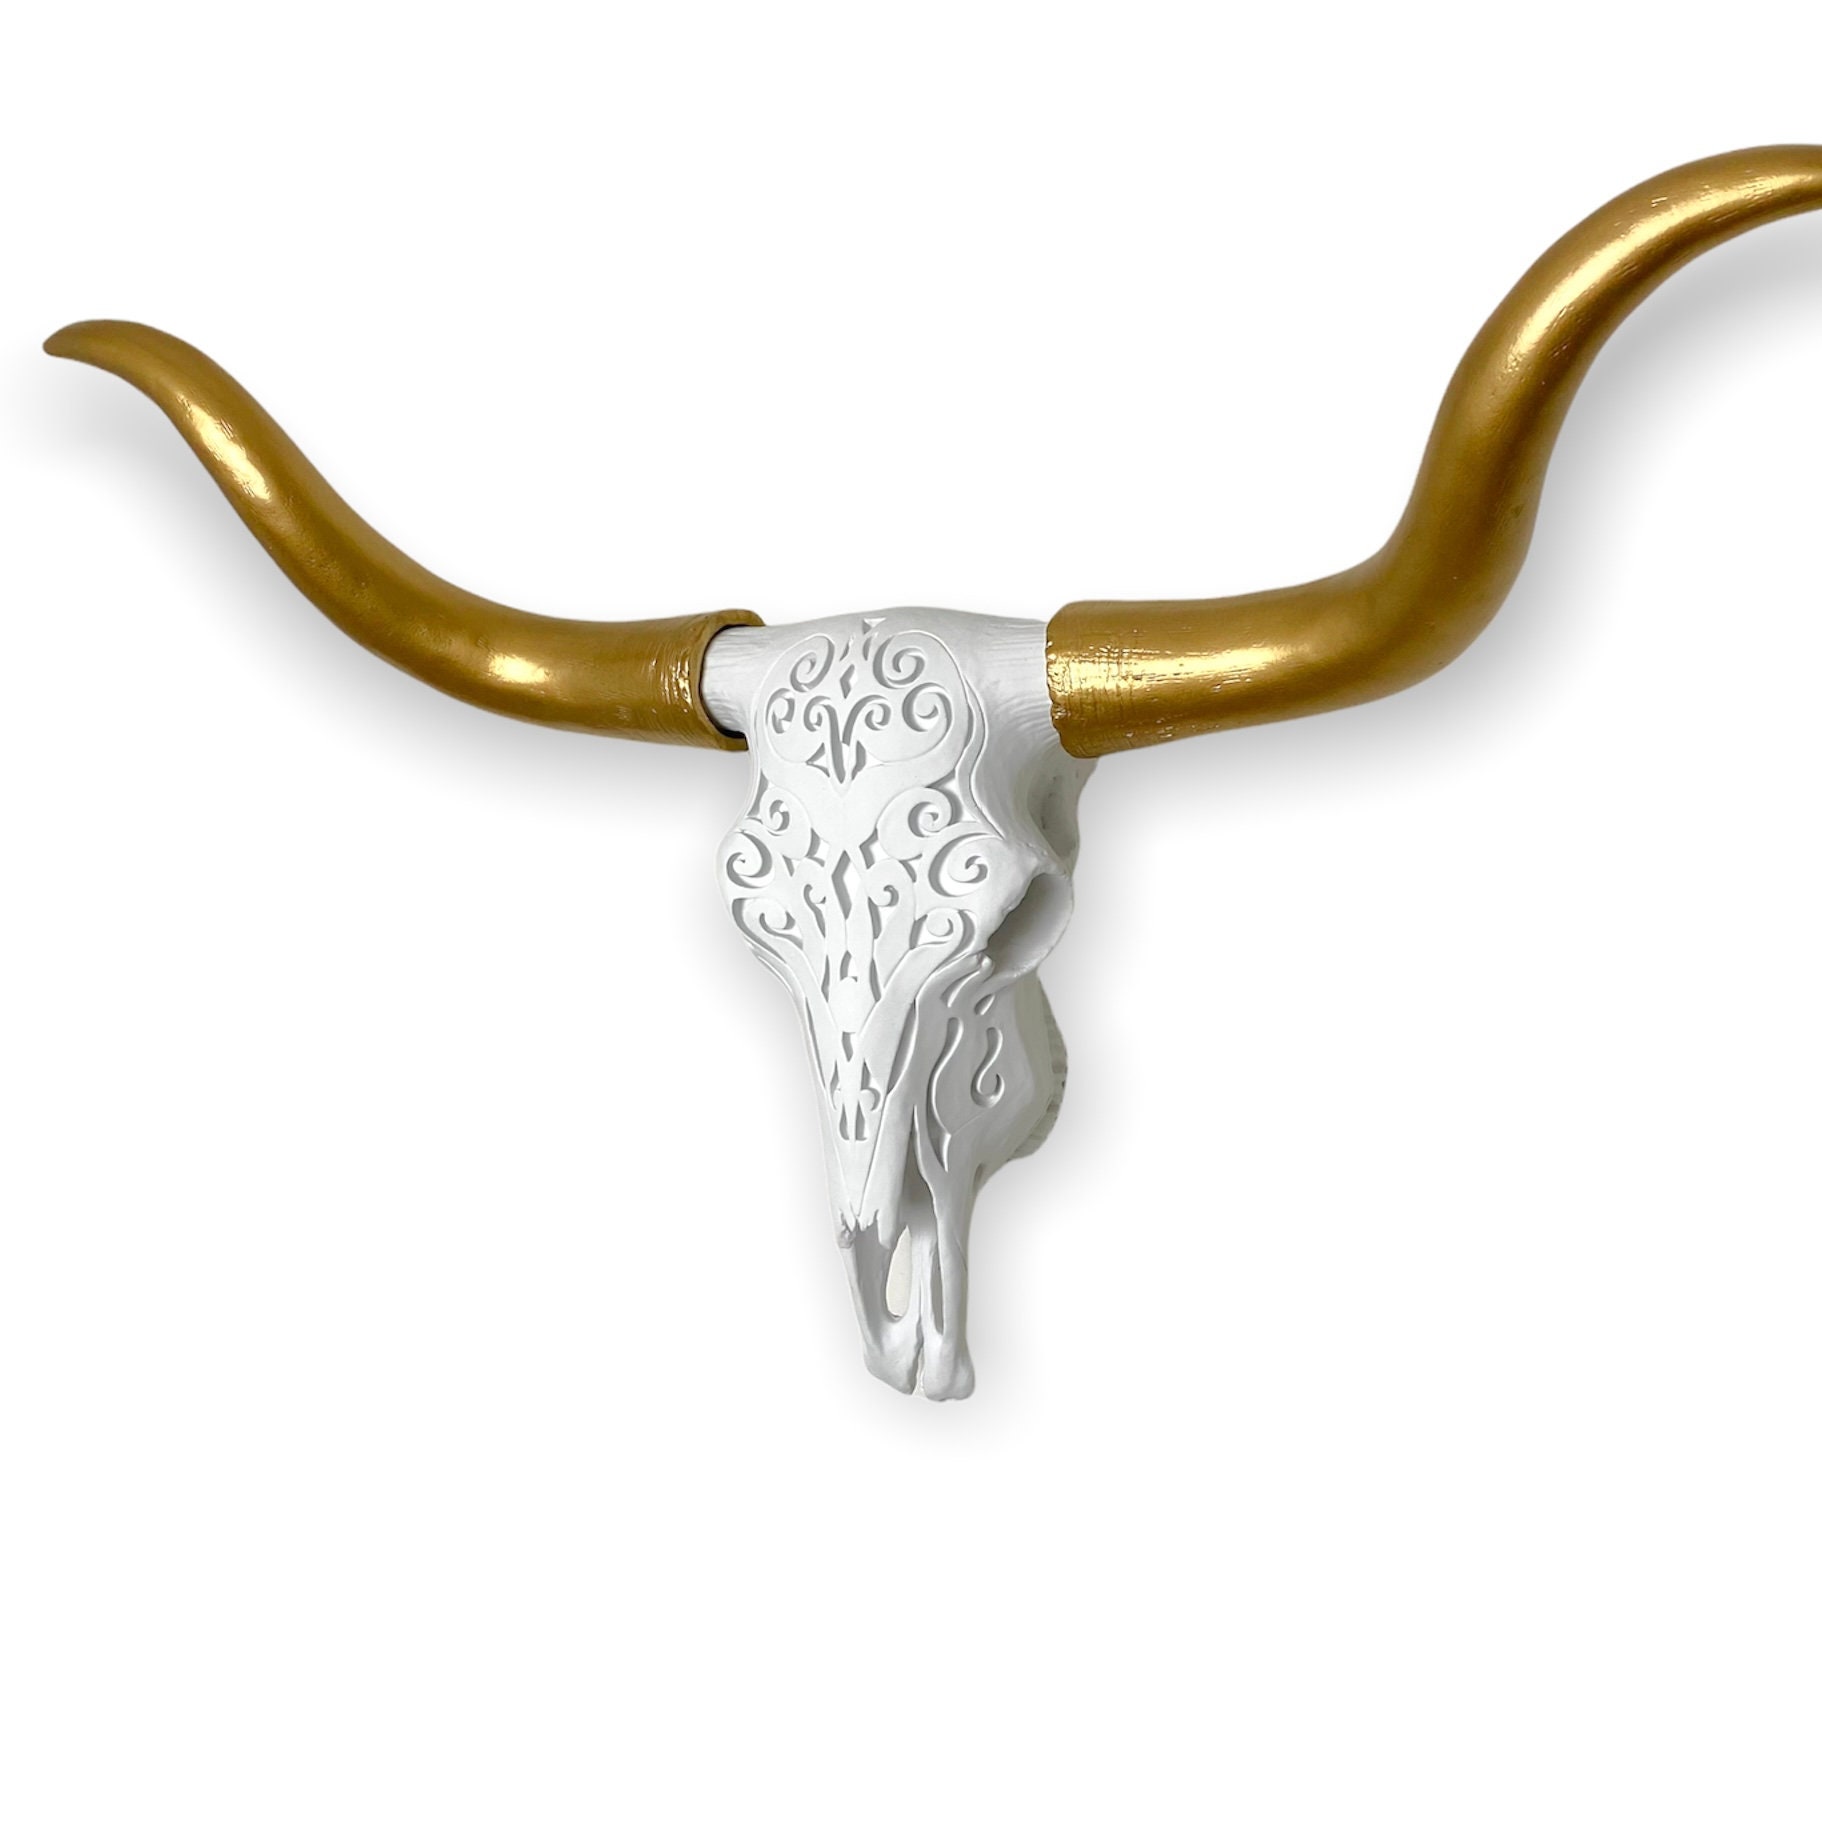 Longhorn Cow Skull Wall Hanging Long Horn Steer Western Decor With Lace 